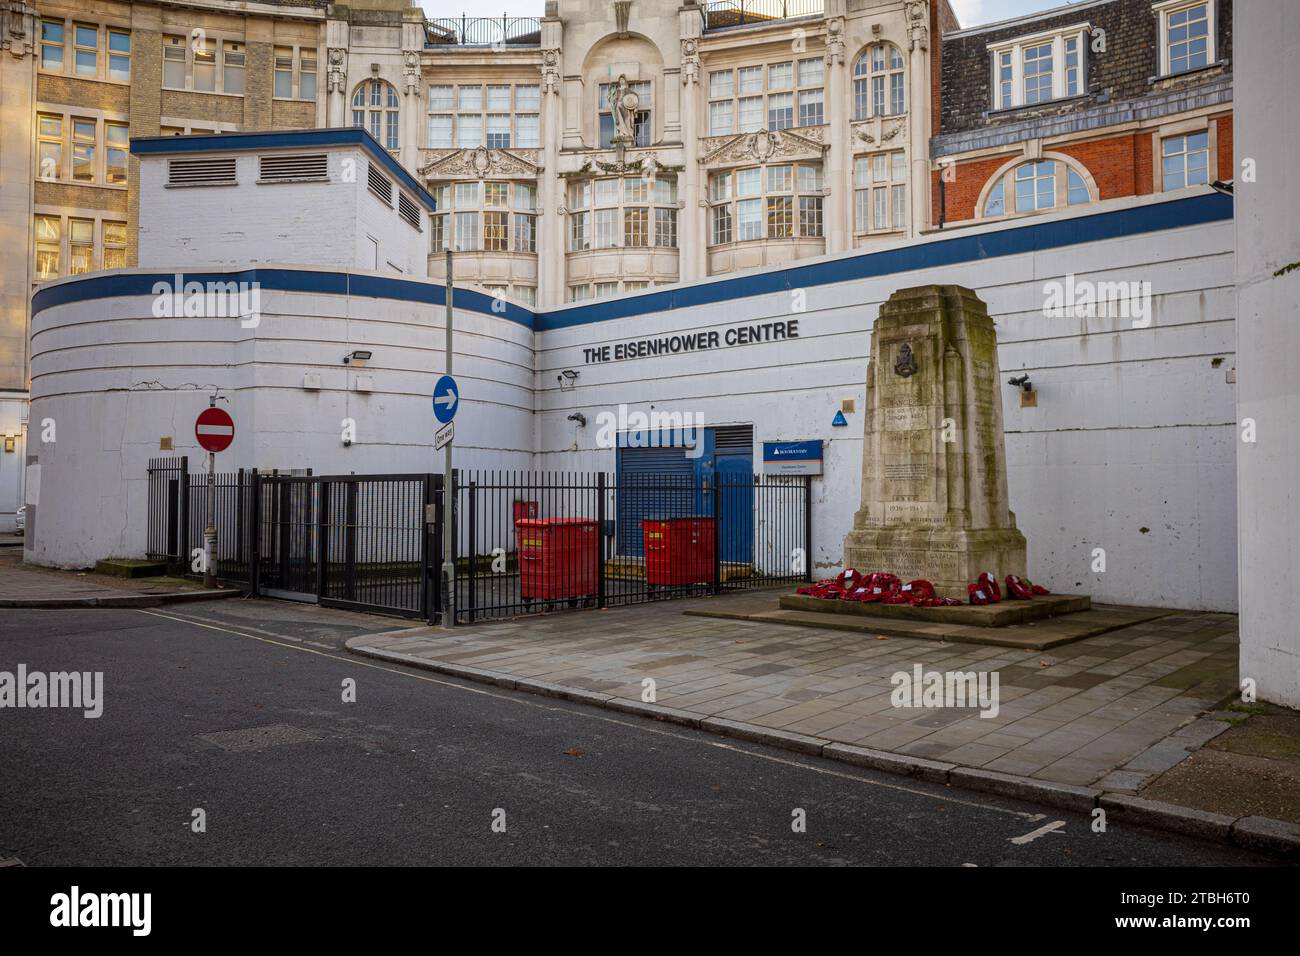 ron Mountain London - Iron Mountain Archive Storage at the Eisenhower Centre in London. The Rangers War Memorial located at front. Stock Photo